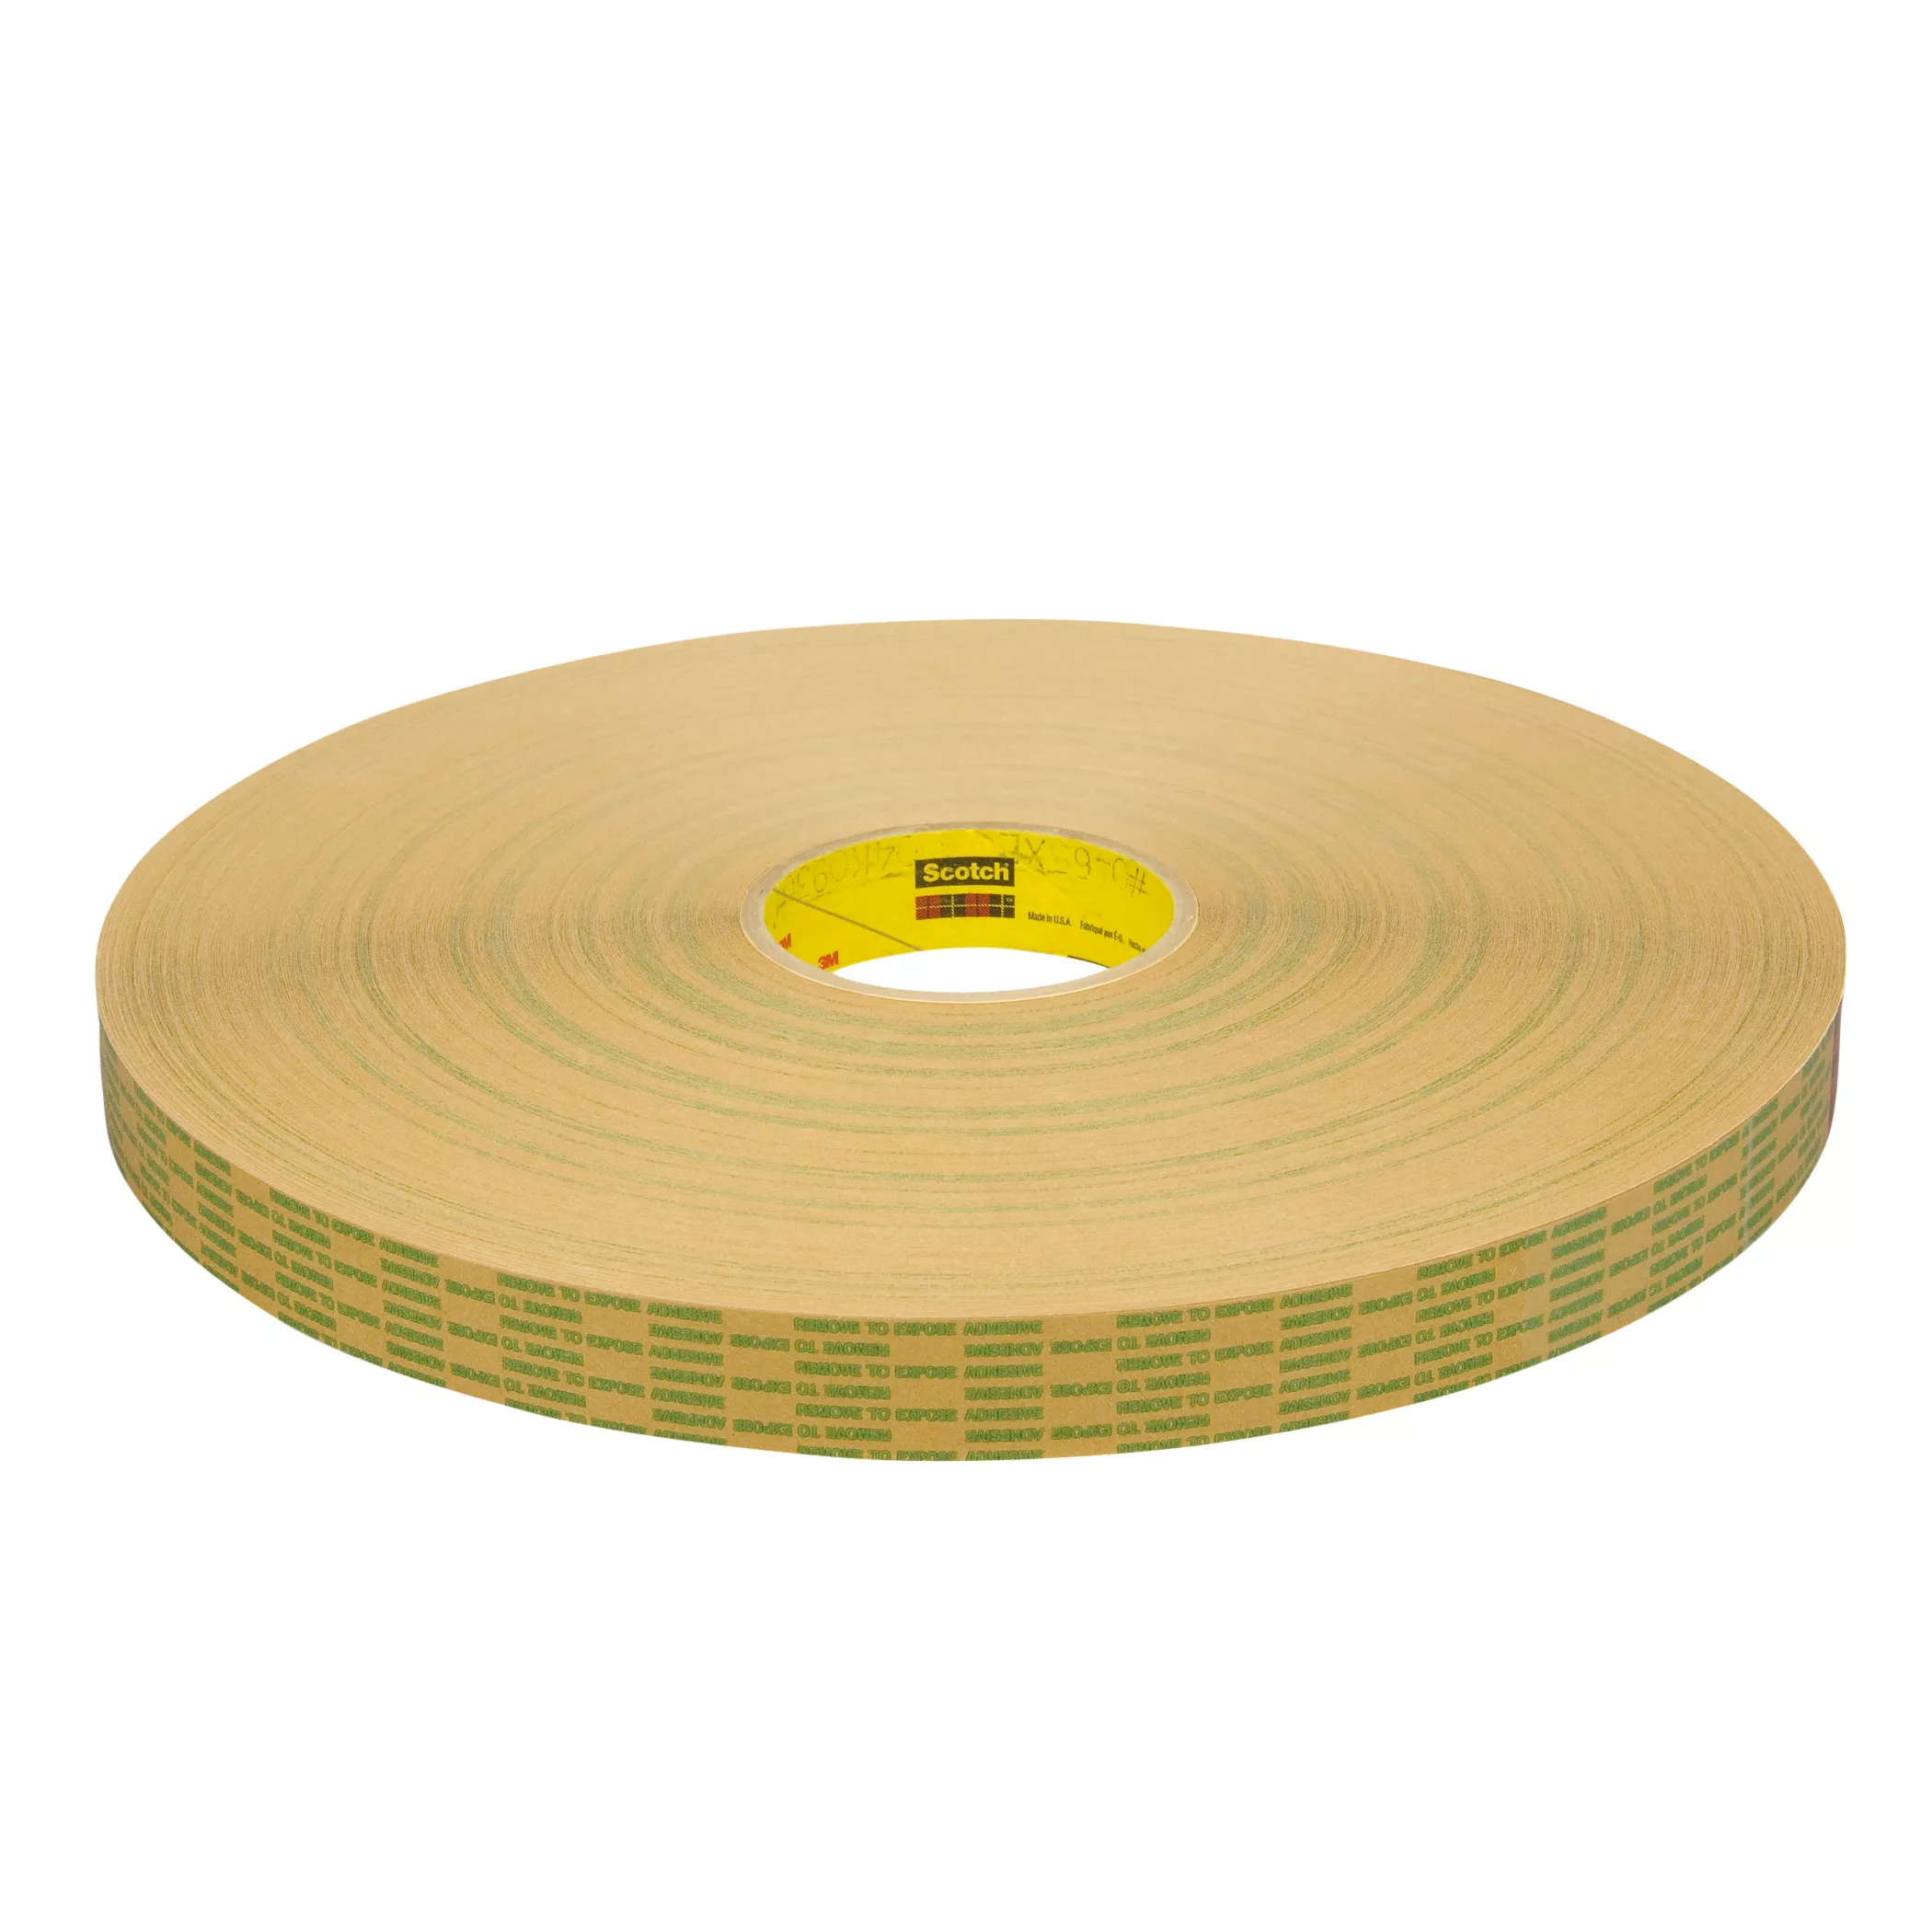 3M™ Adhesive Transfer Tape Extended Liner 465XL, Translucent, 1 in x 600
yd, 2 mil, 9 Roll/Case